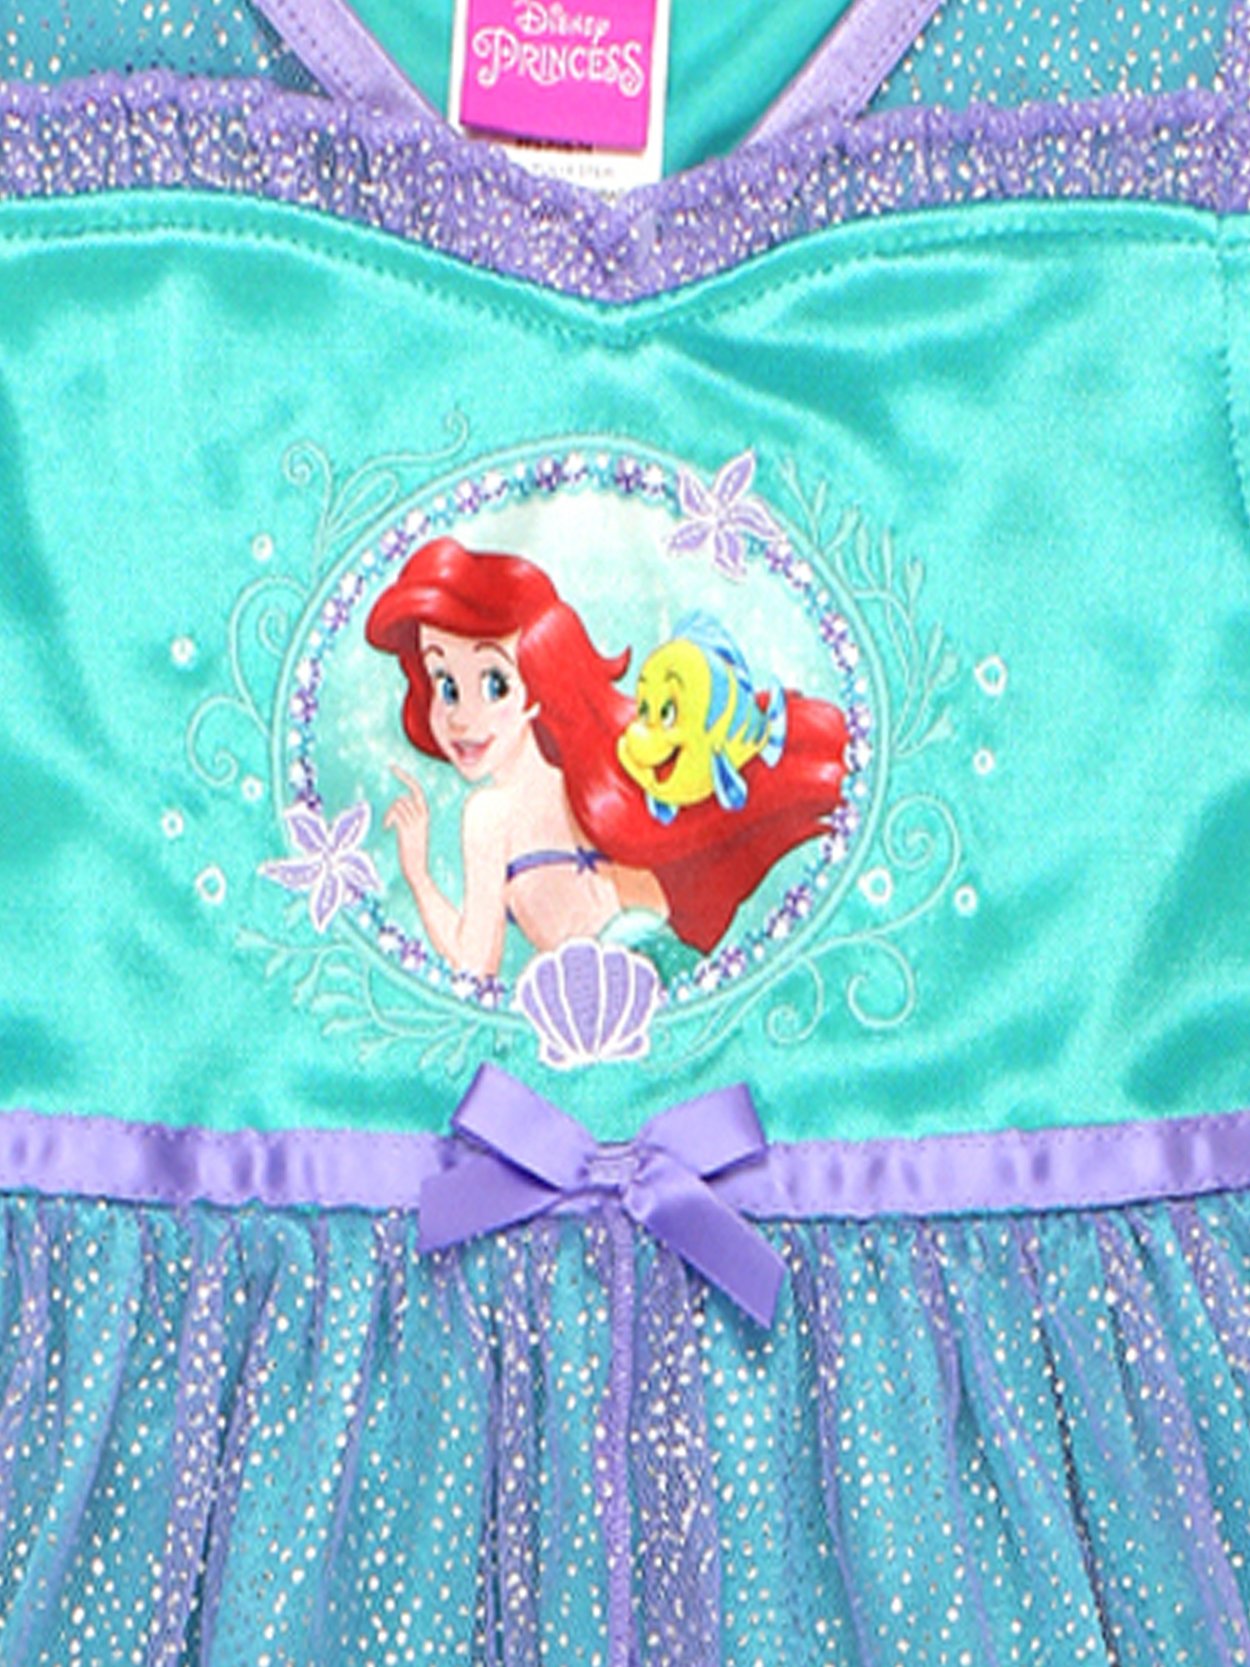 The Little Mermaid Ariel Toddler Girls Fantasy Gown Nightgown Pajamas 21LM165TGS - image 4 of 7